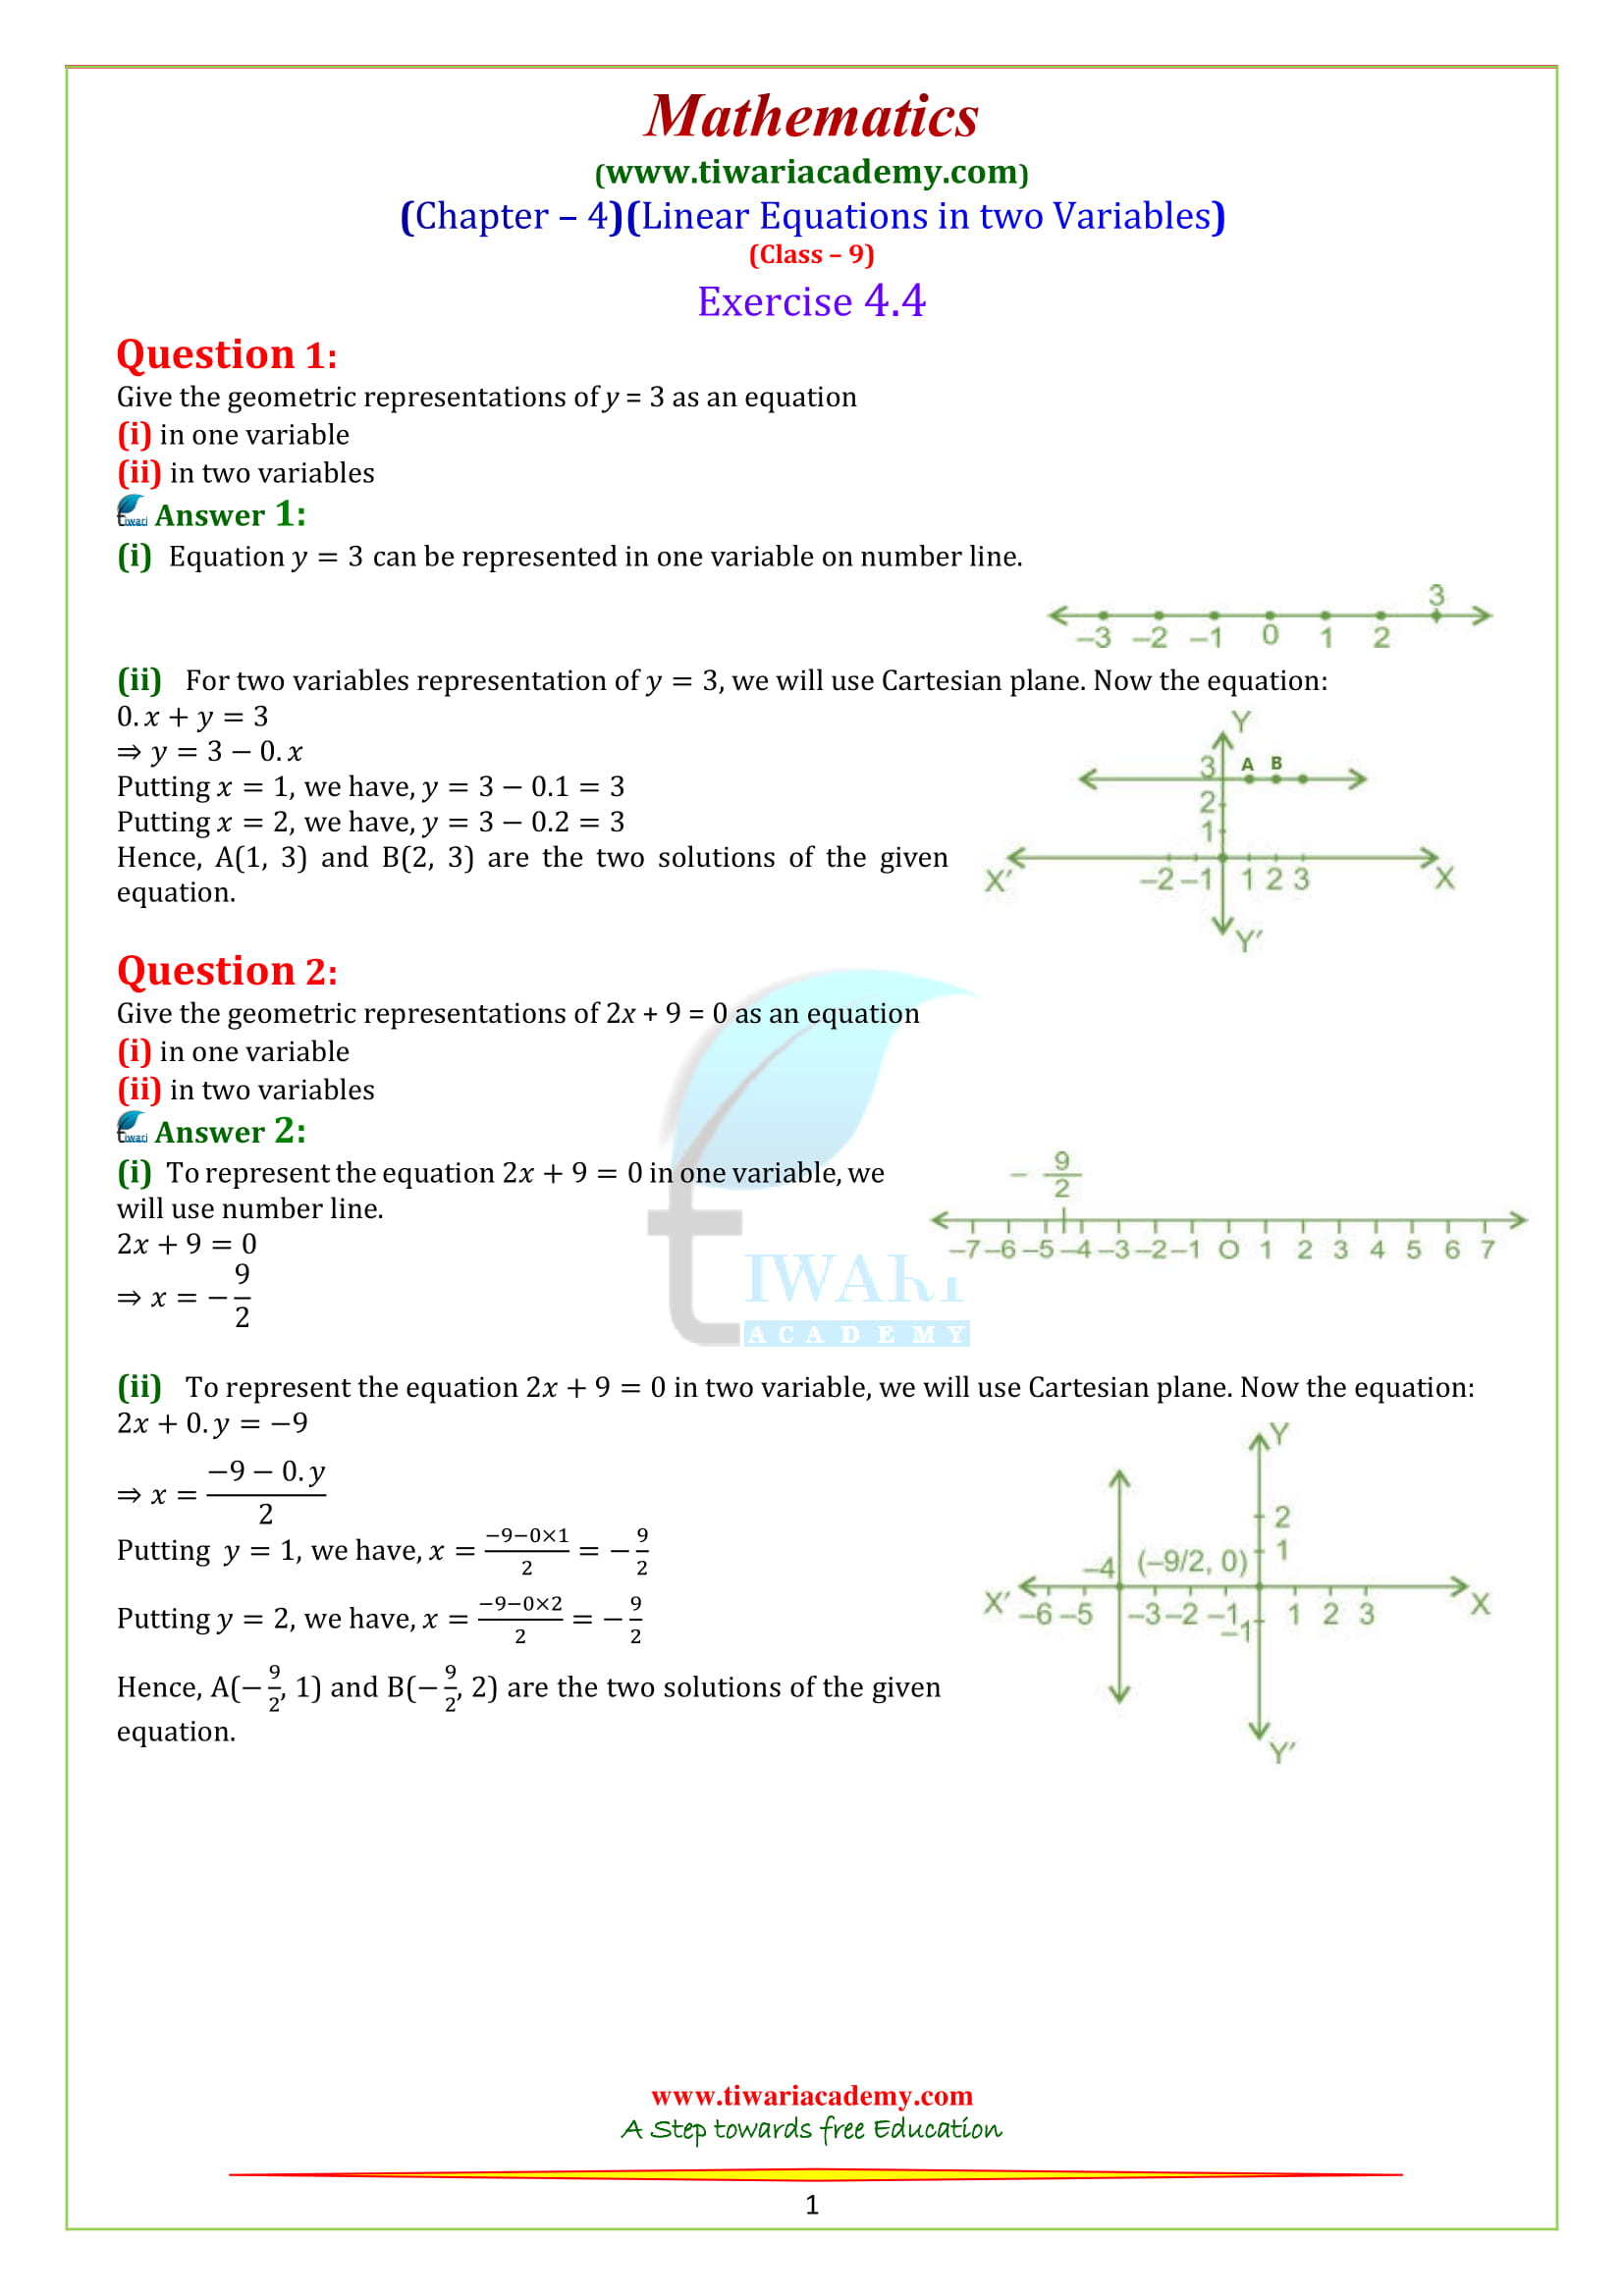 NCERT Solutions for Class 9 Maths Chapter 4 Exercise 4.4 in English medium